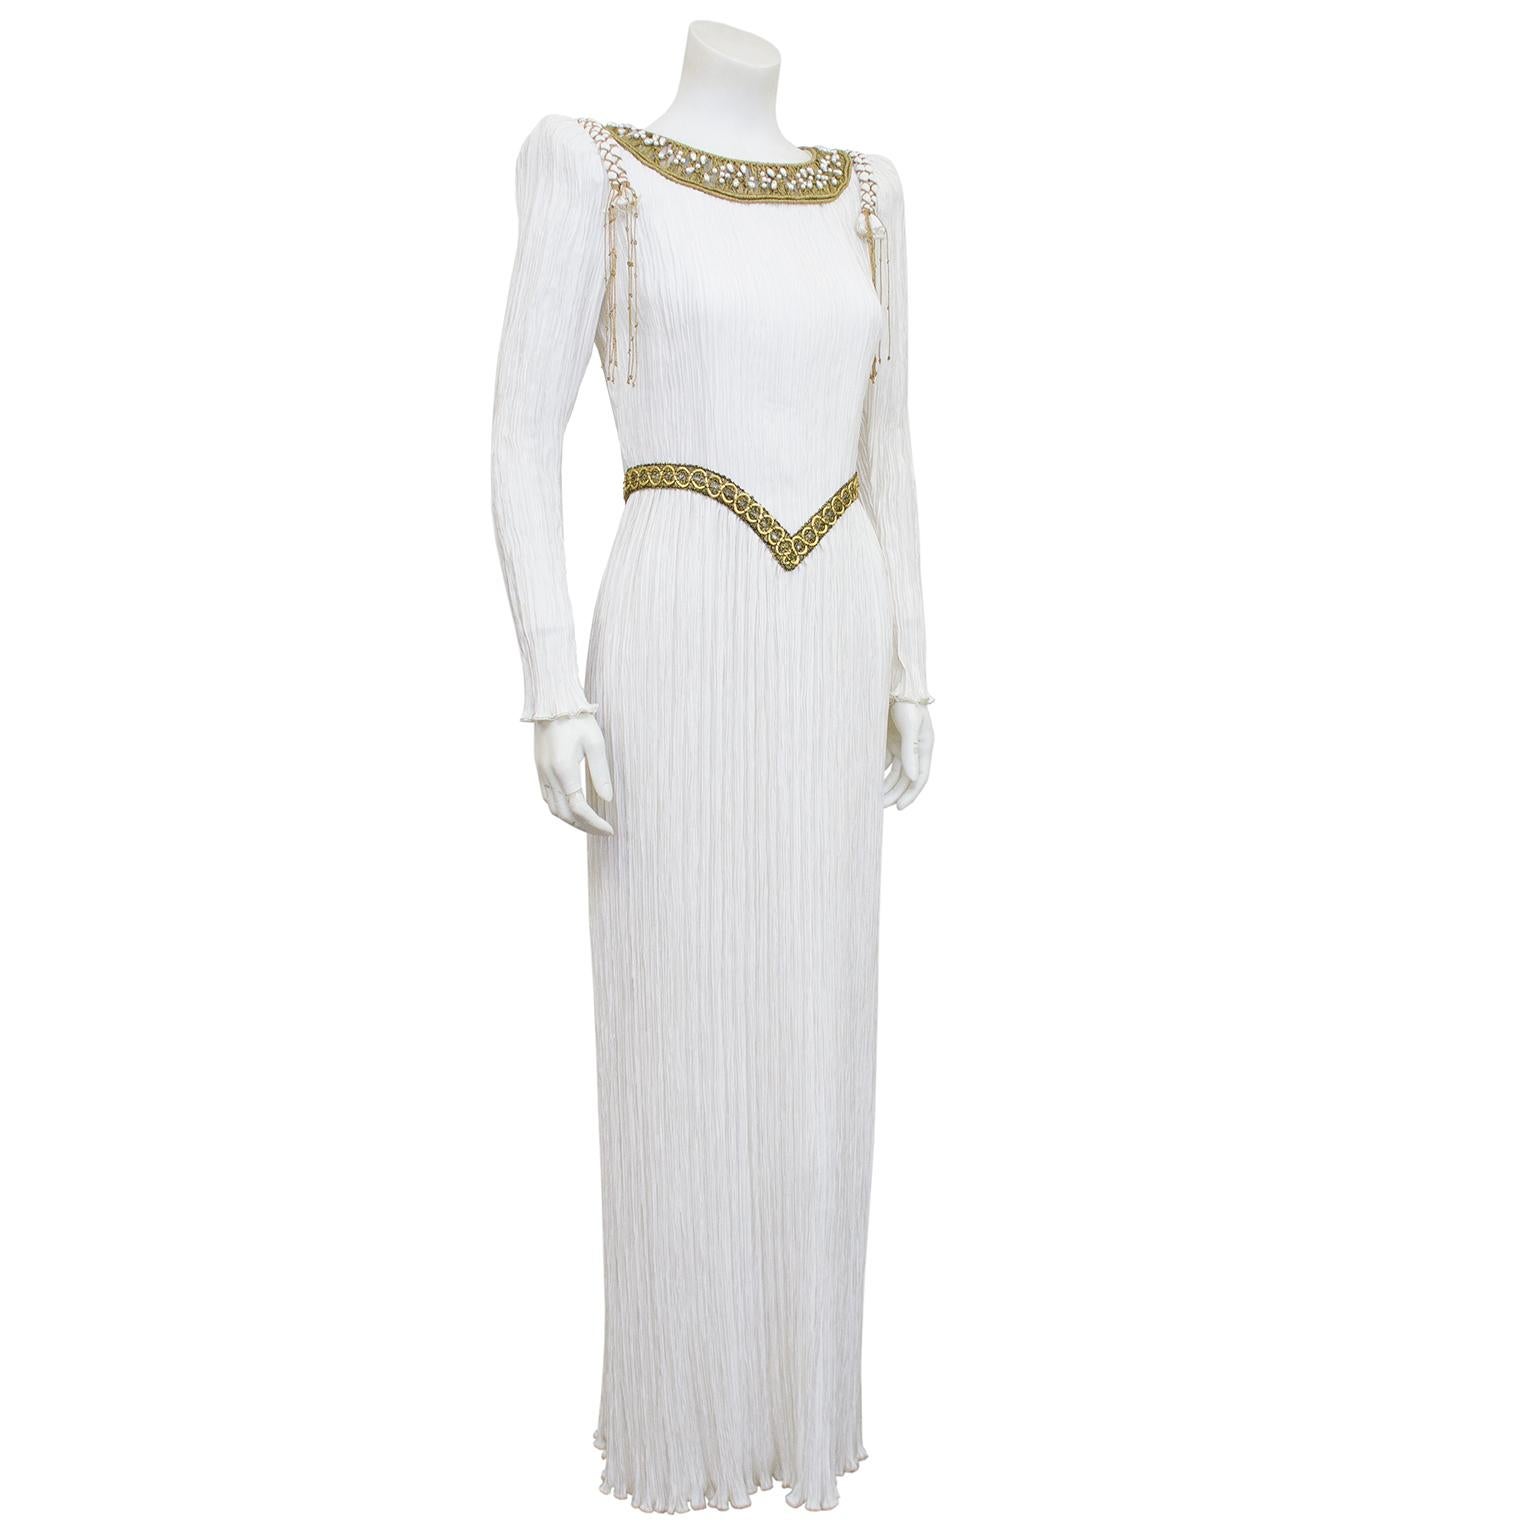 1980s fabulous white micro pleated Mary McFadden gown. Long sleeves with fitted bodice and straight skirt. Beautiful metallic gold macramé and pearl neckline, gold wrapped rope detail at shoulders and gold v shaped detail at waist. Would be a